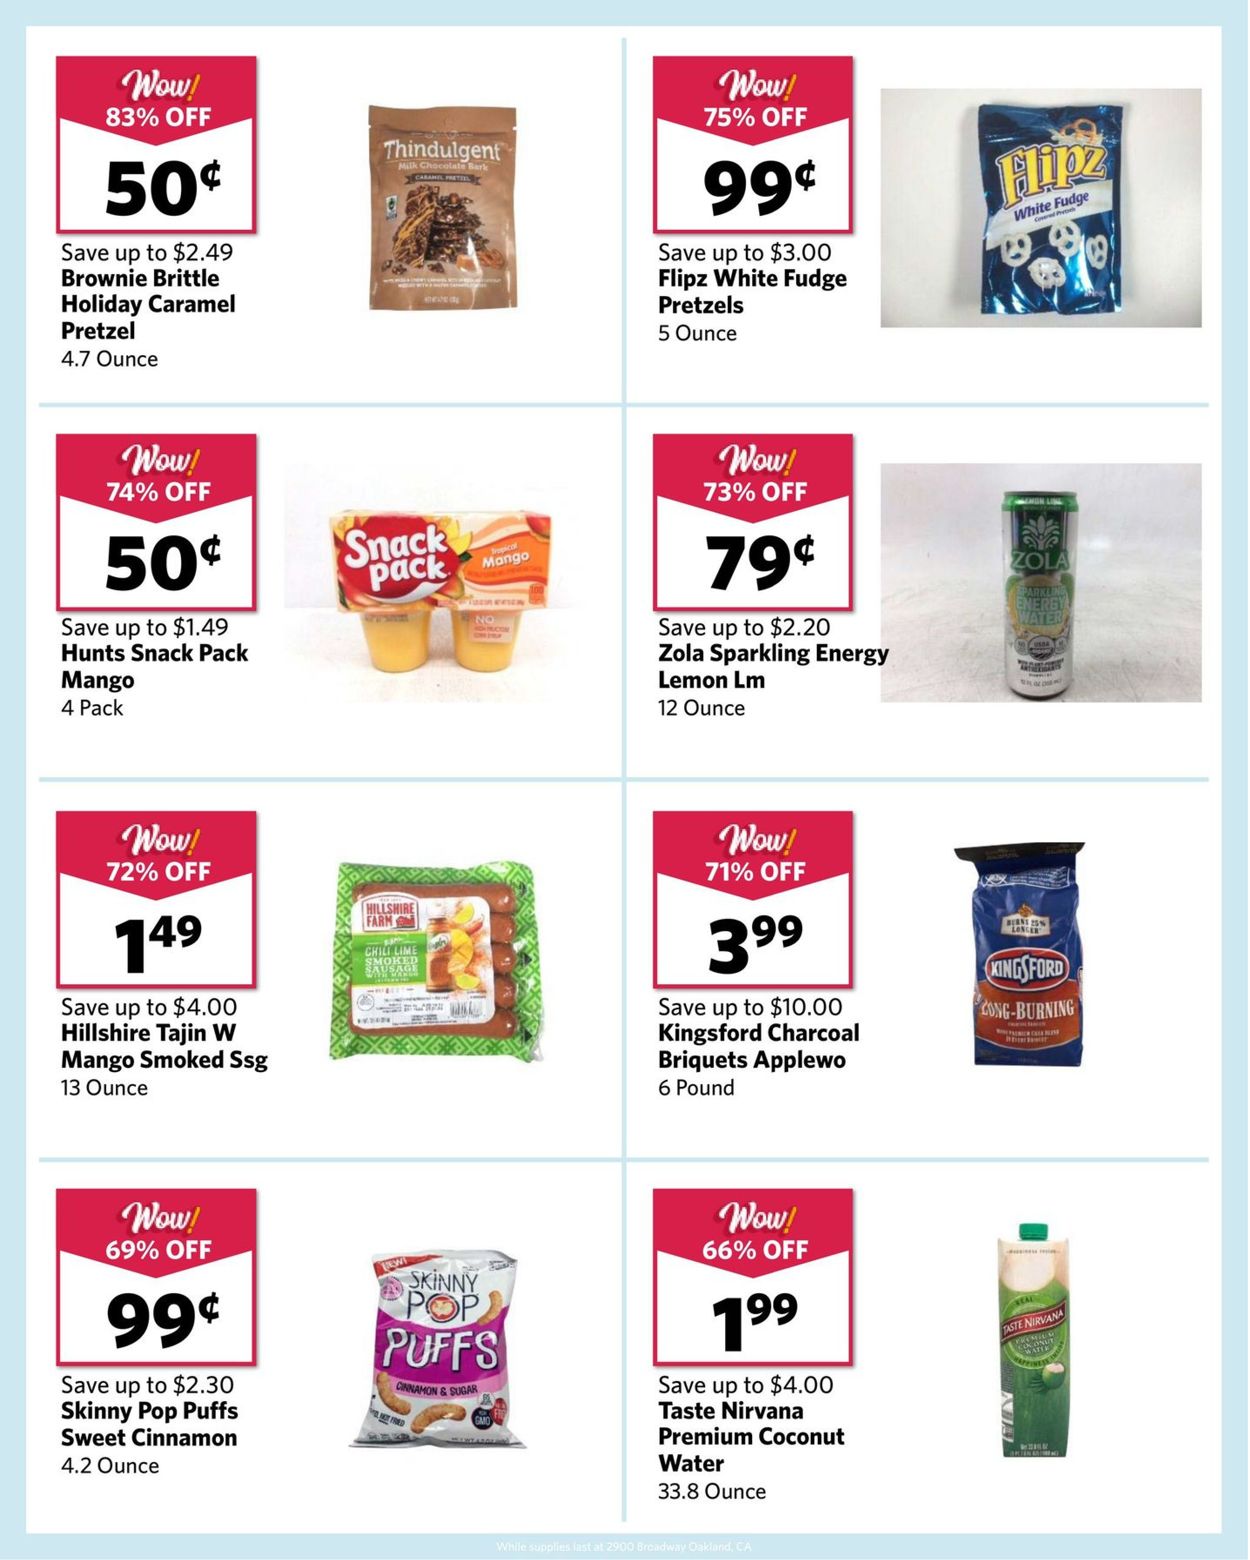 Grocery Outlet - Holiday Ad 2019 Weekly Ad Circular - valid 12/18-12/24/2019 (Page 7)